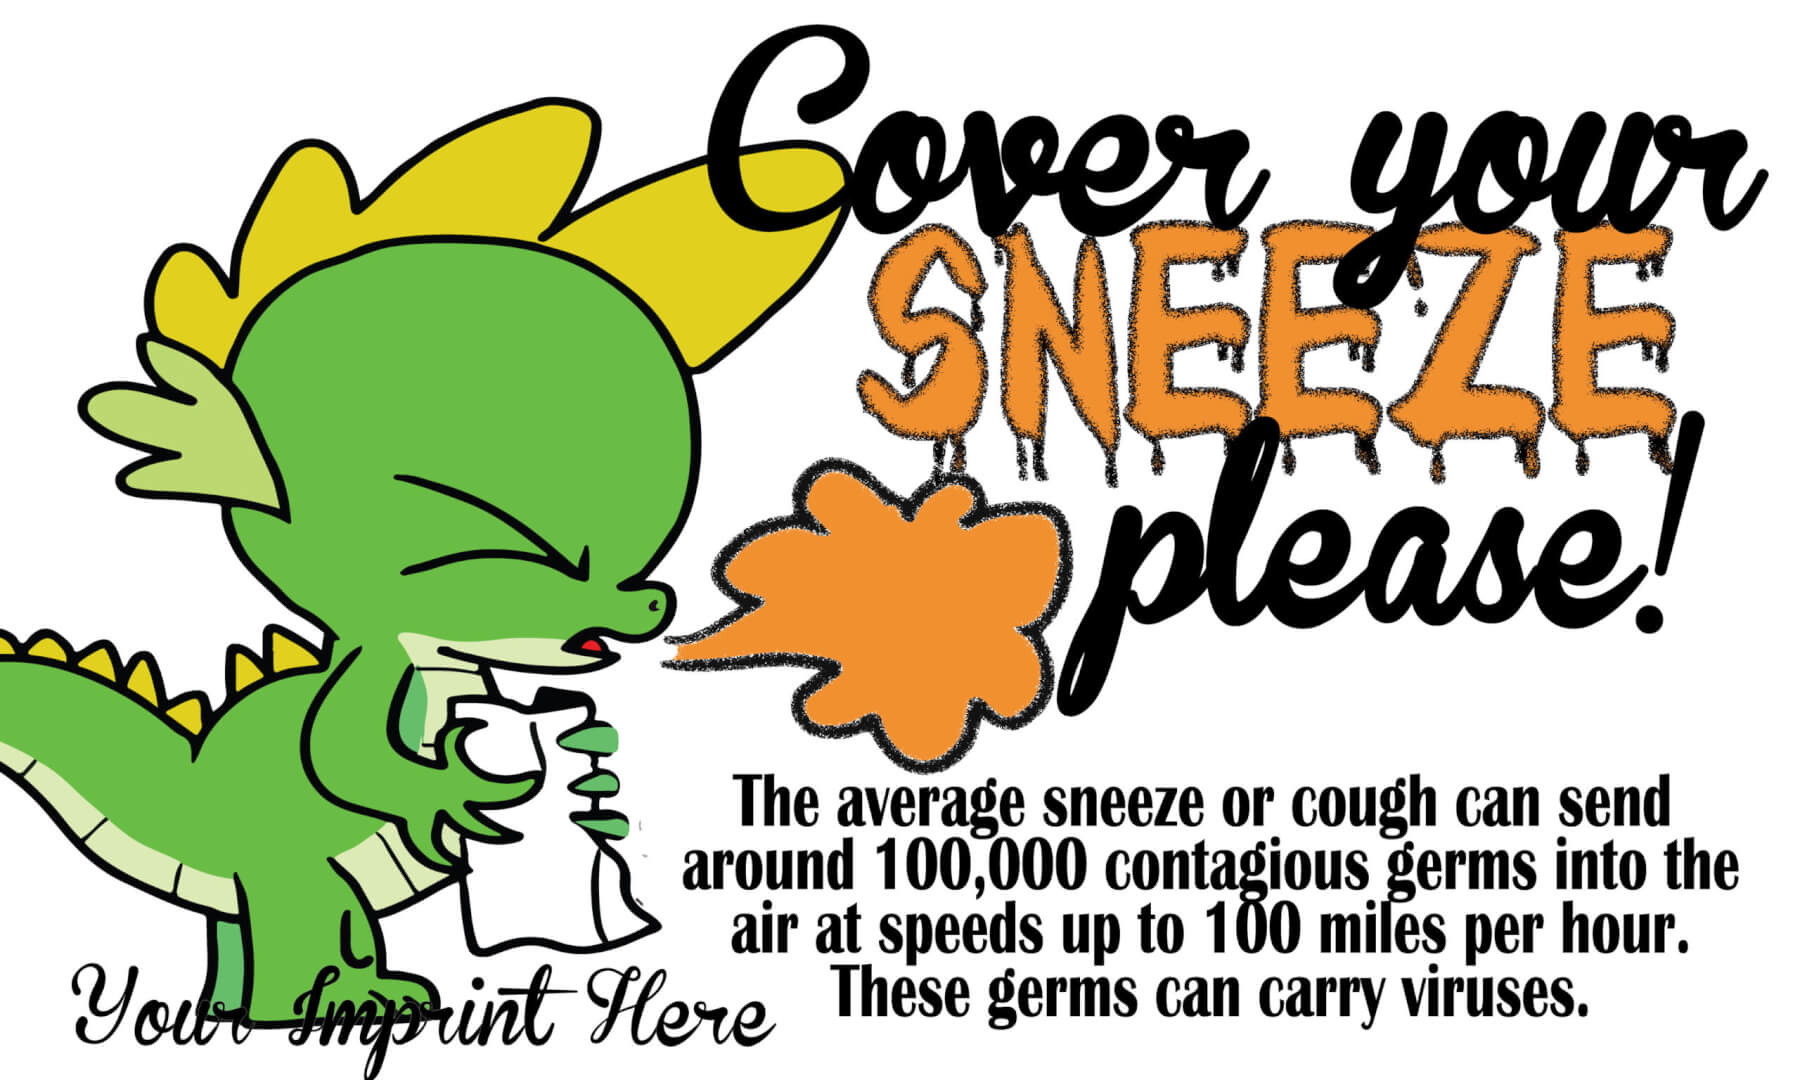 Cover Your Sneeze banner. 